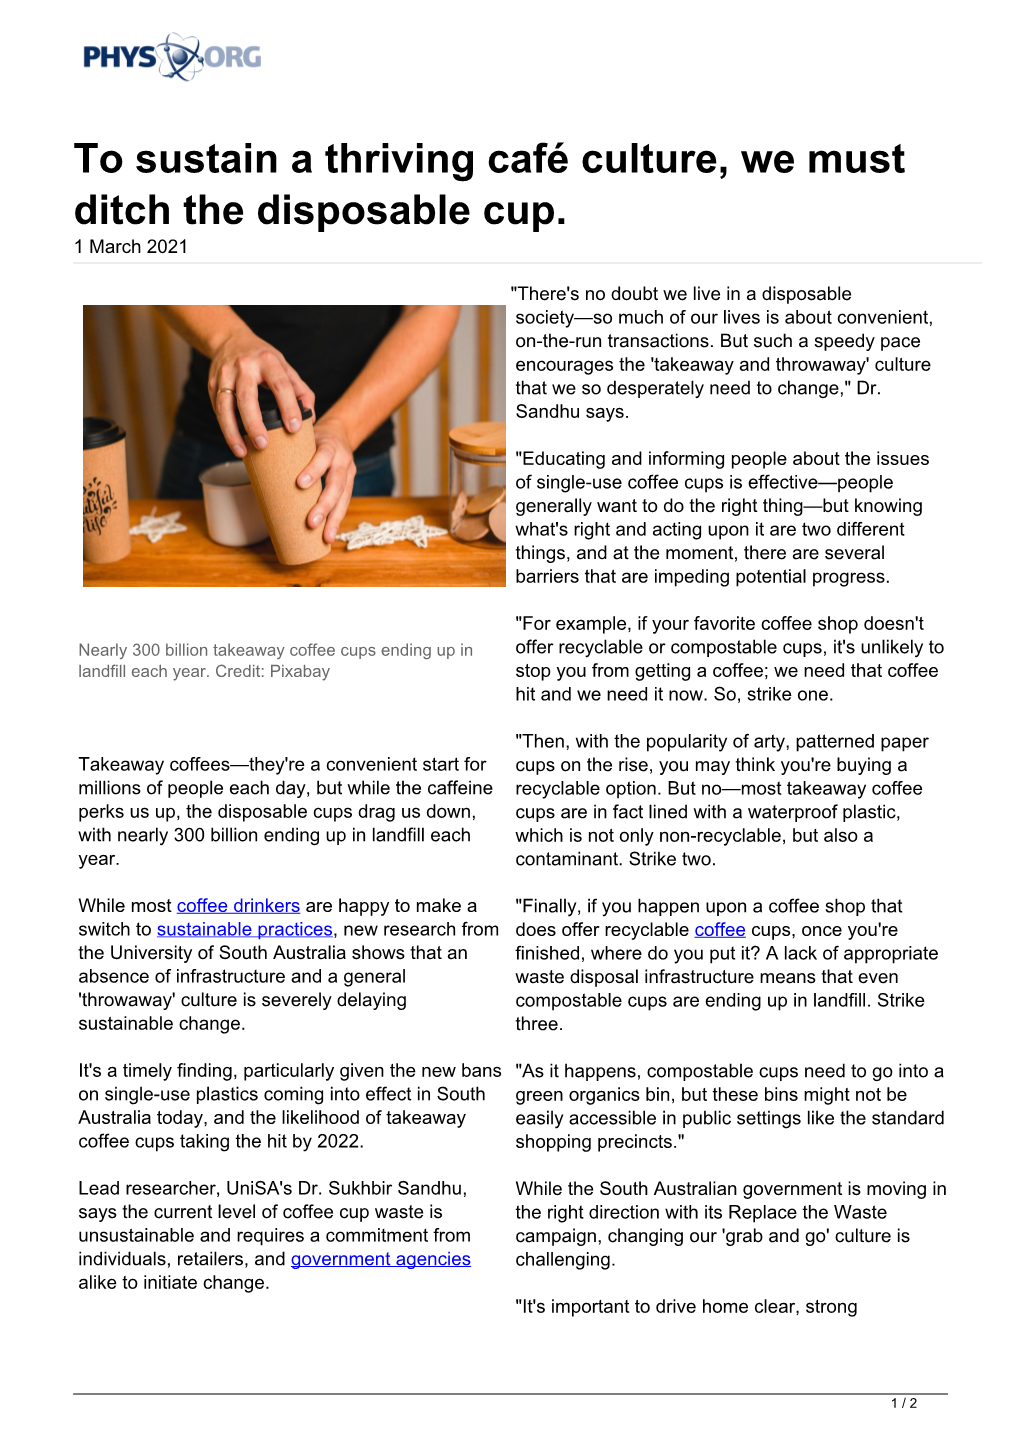 To Sustain a Thriving Café Culture, We Must Ditch the Disposable Cup. 1 March 2021